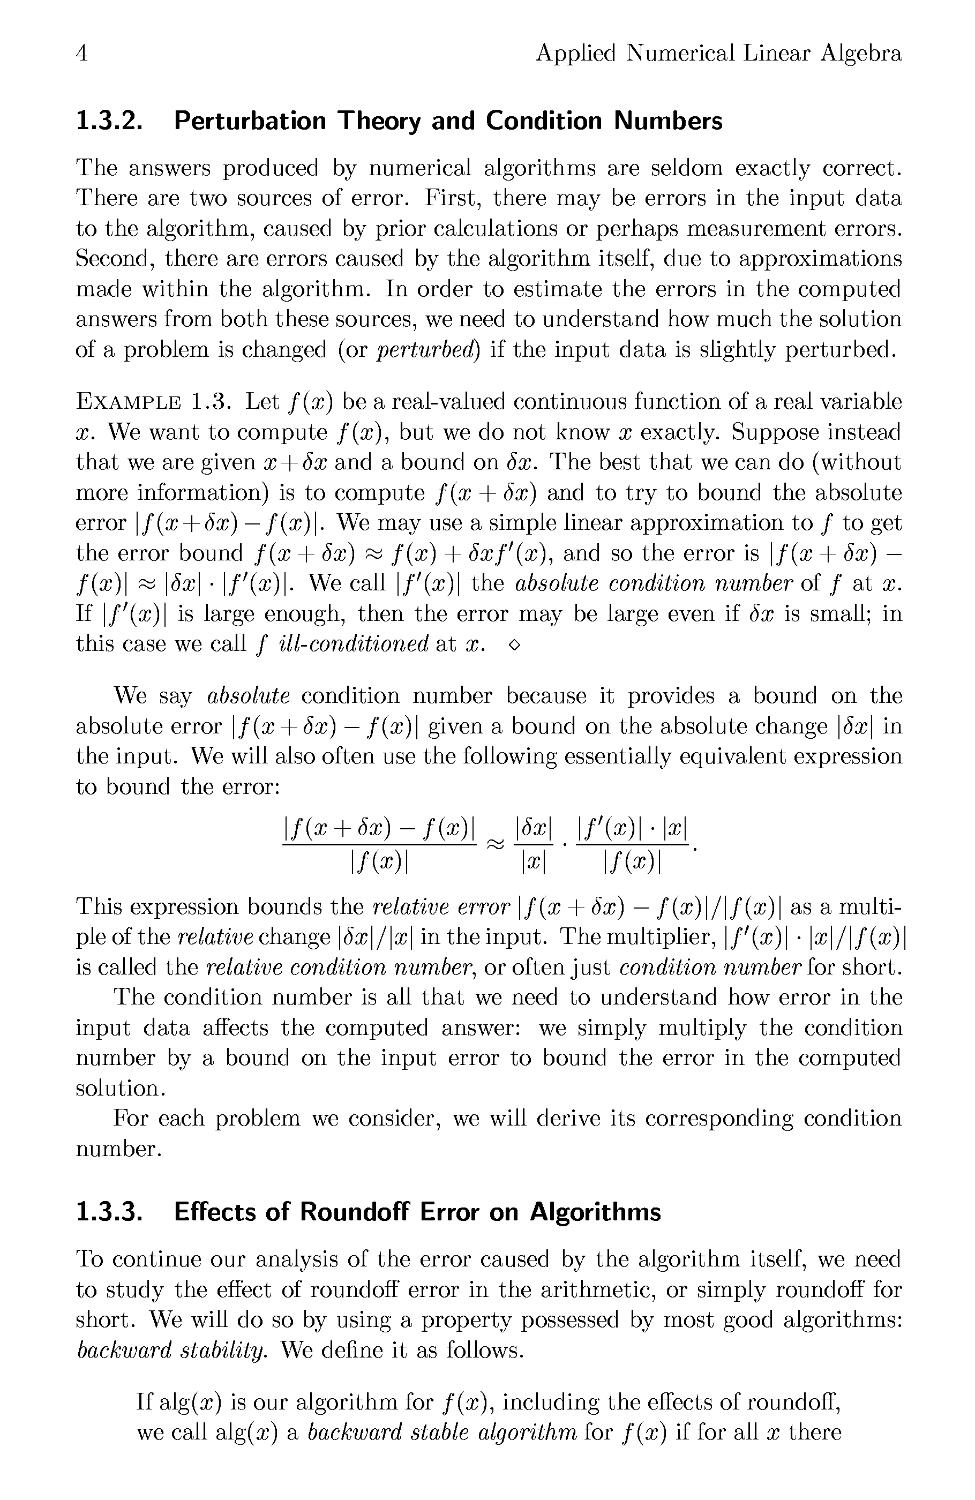 1.3.2 Perturbation Theory and Condition Numbers
1.3.3 Effects of Roundoff Error on Algorithms